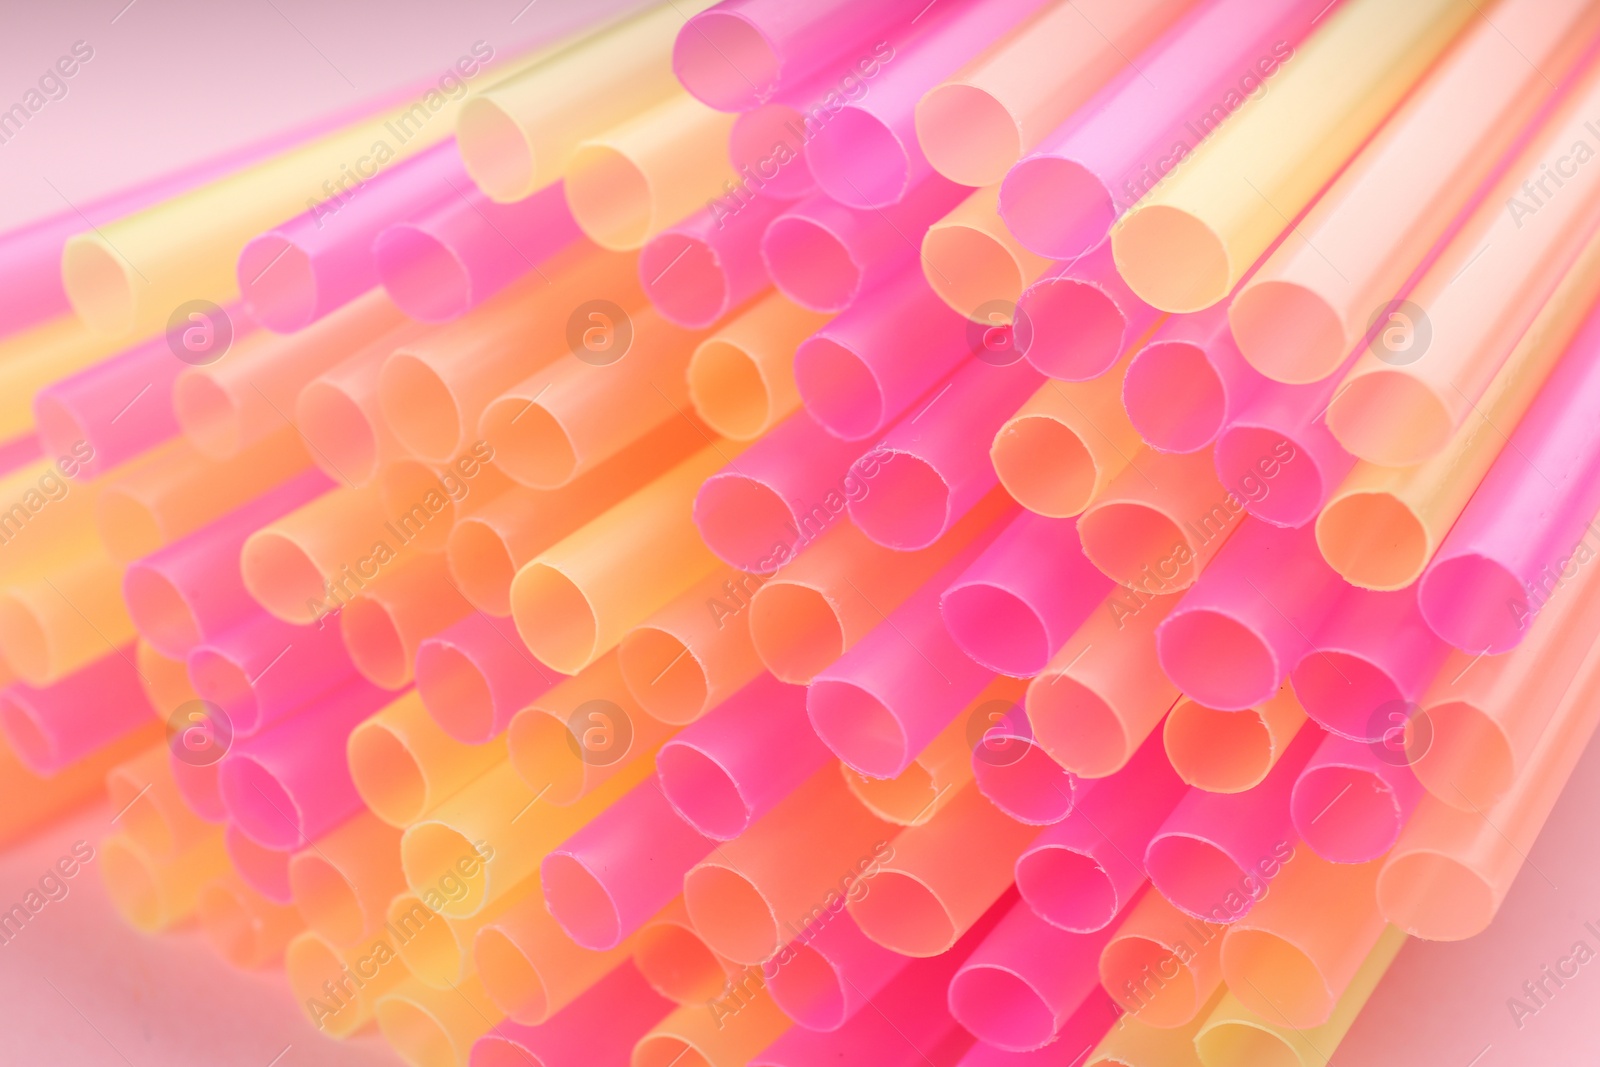 Photo of Heap of colorful plastic straws for drinks, closeup